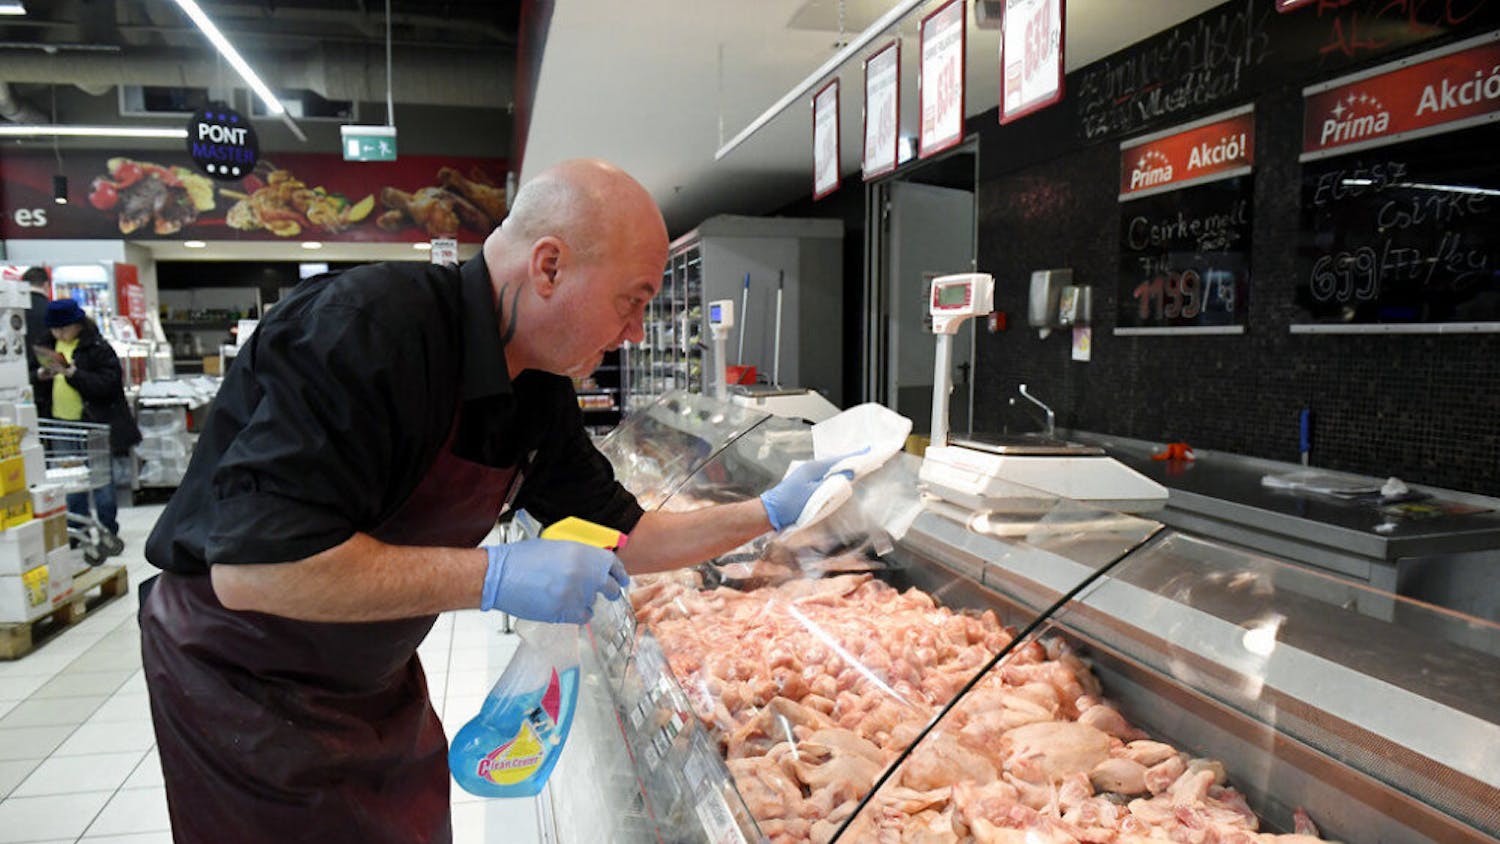 An employee disinfects the glass cover of a butcher counter to prevent the spread of the novel coronavirus in a food store in Budapest, Hungary, Wednesday, March 11, 2020. For most people, the new coronavirus causes only mild or moderate symptoms, such as fever and cough. For some, especially older adults and people with existing health problems, it can cause more severe illness, including pneumonia. (Tamas Kovacs/MTI via AP)